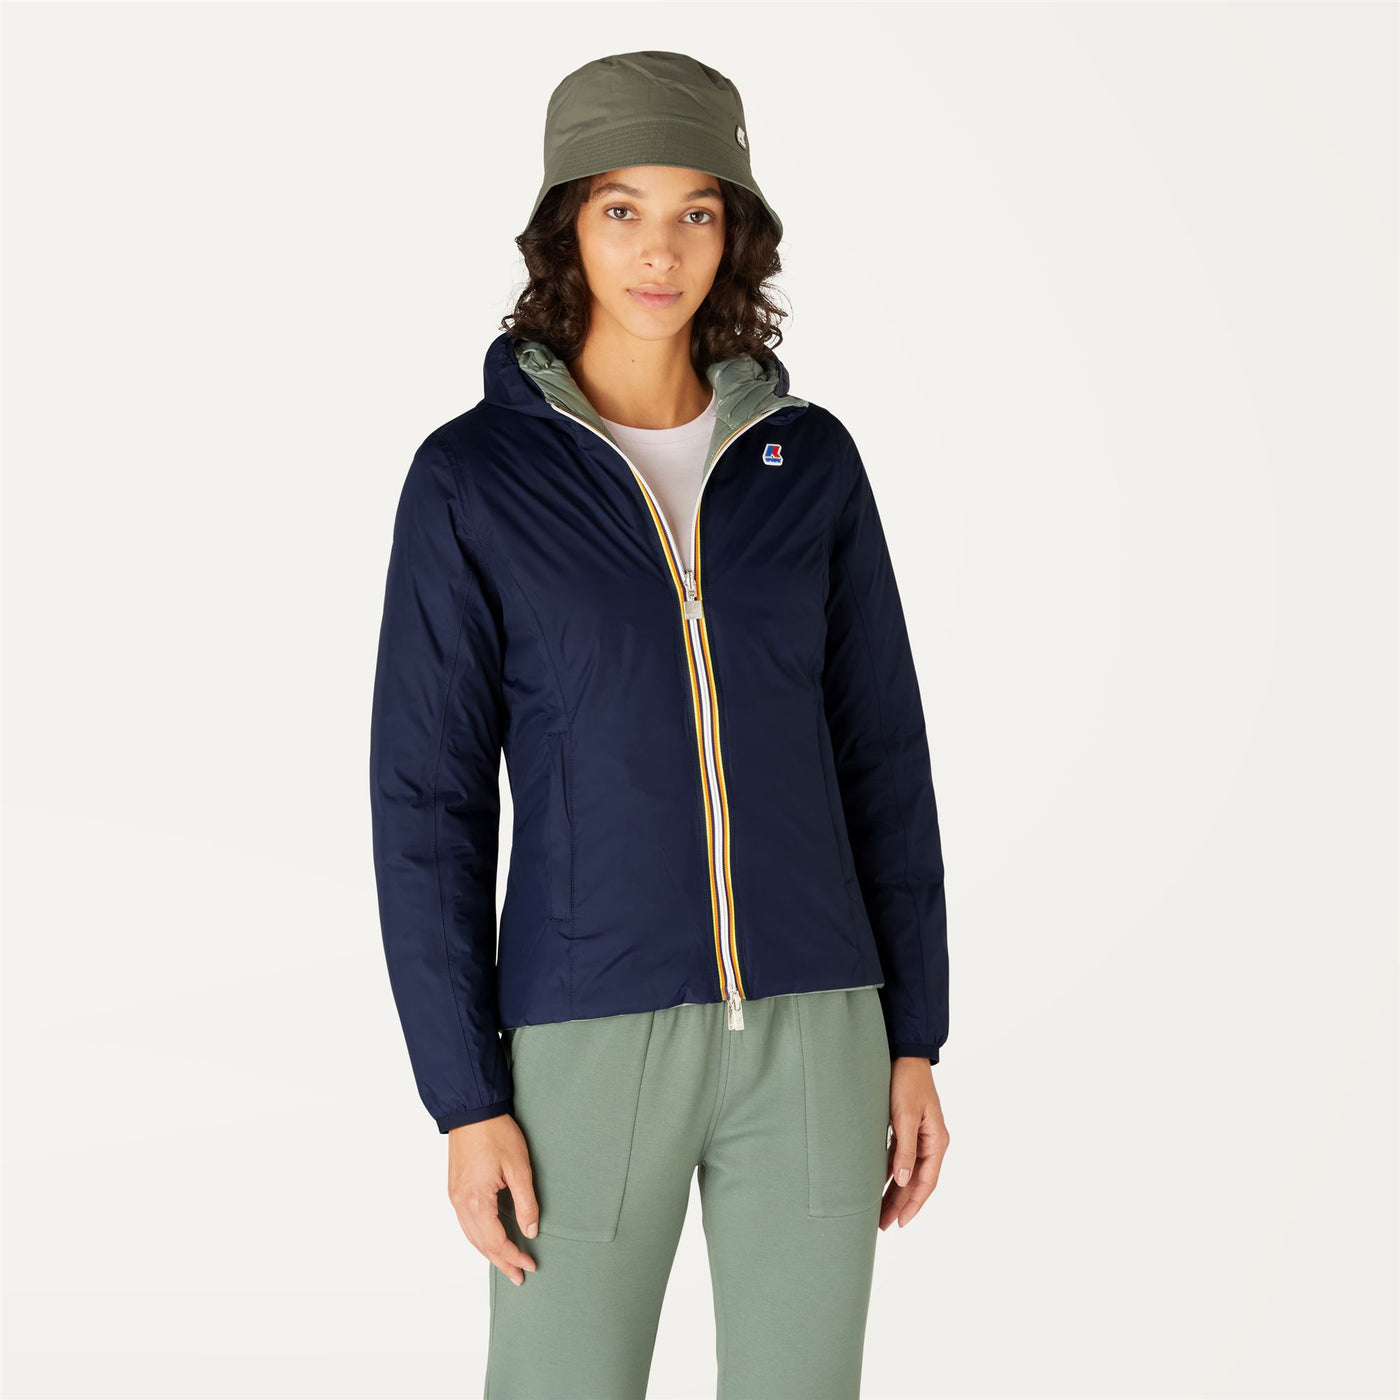 Jackets Woman LILY THERMO PLUS.2 DOUBLE Short BLUE DEPTH - GREEN LAUREL Dressed Back (jpg Rgb)		